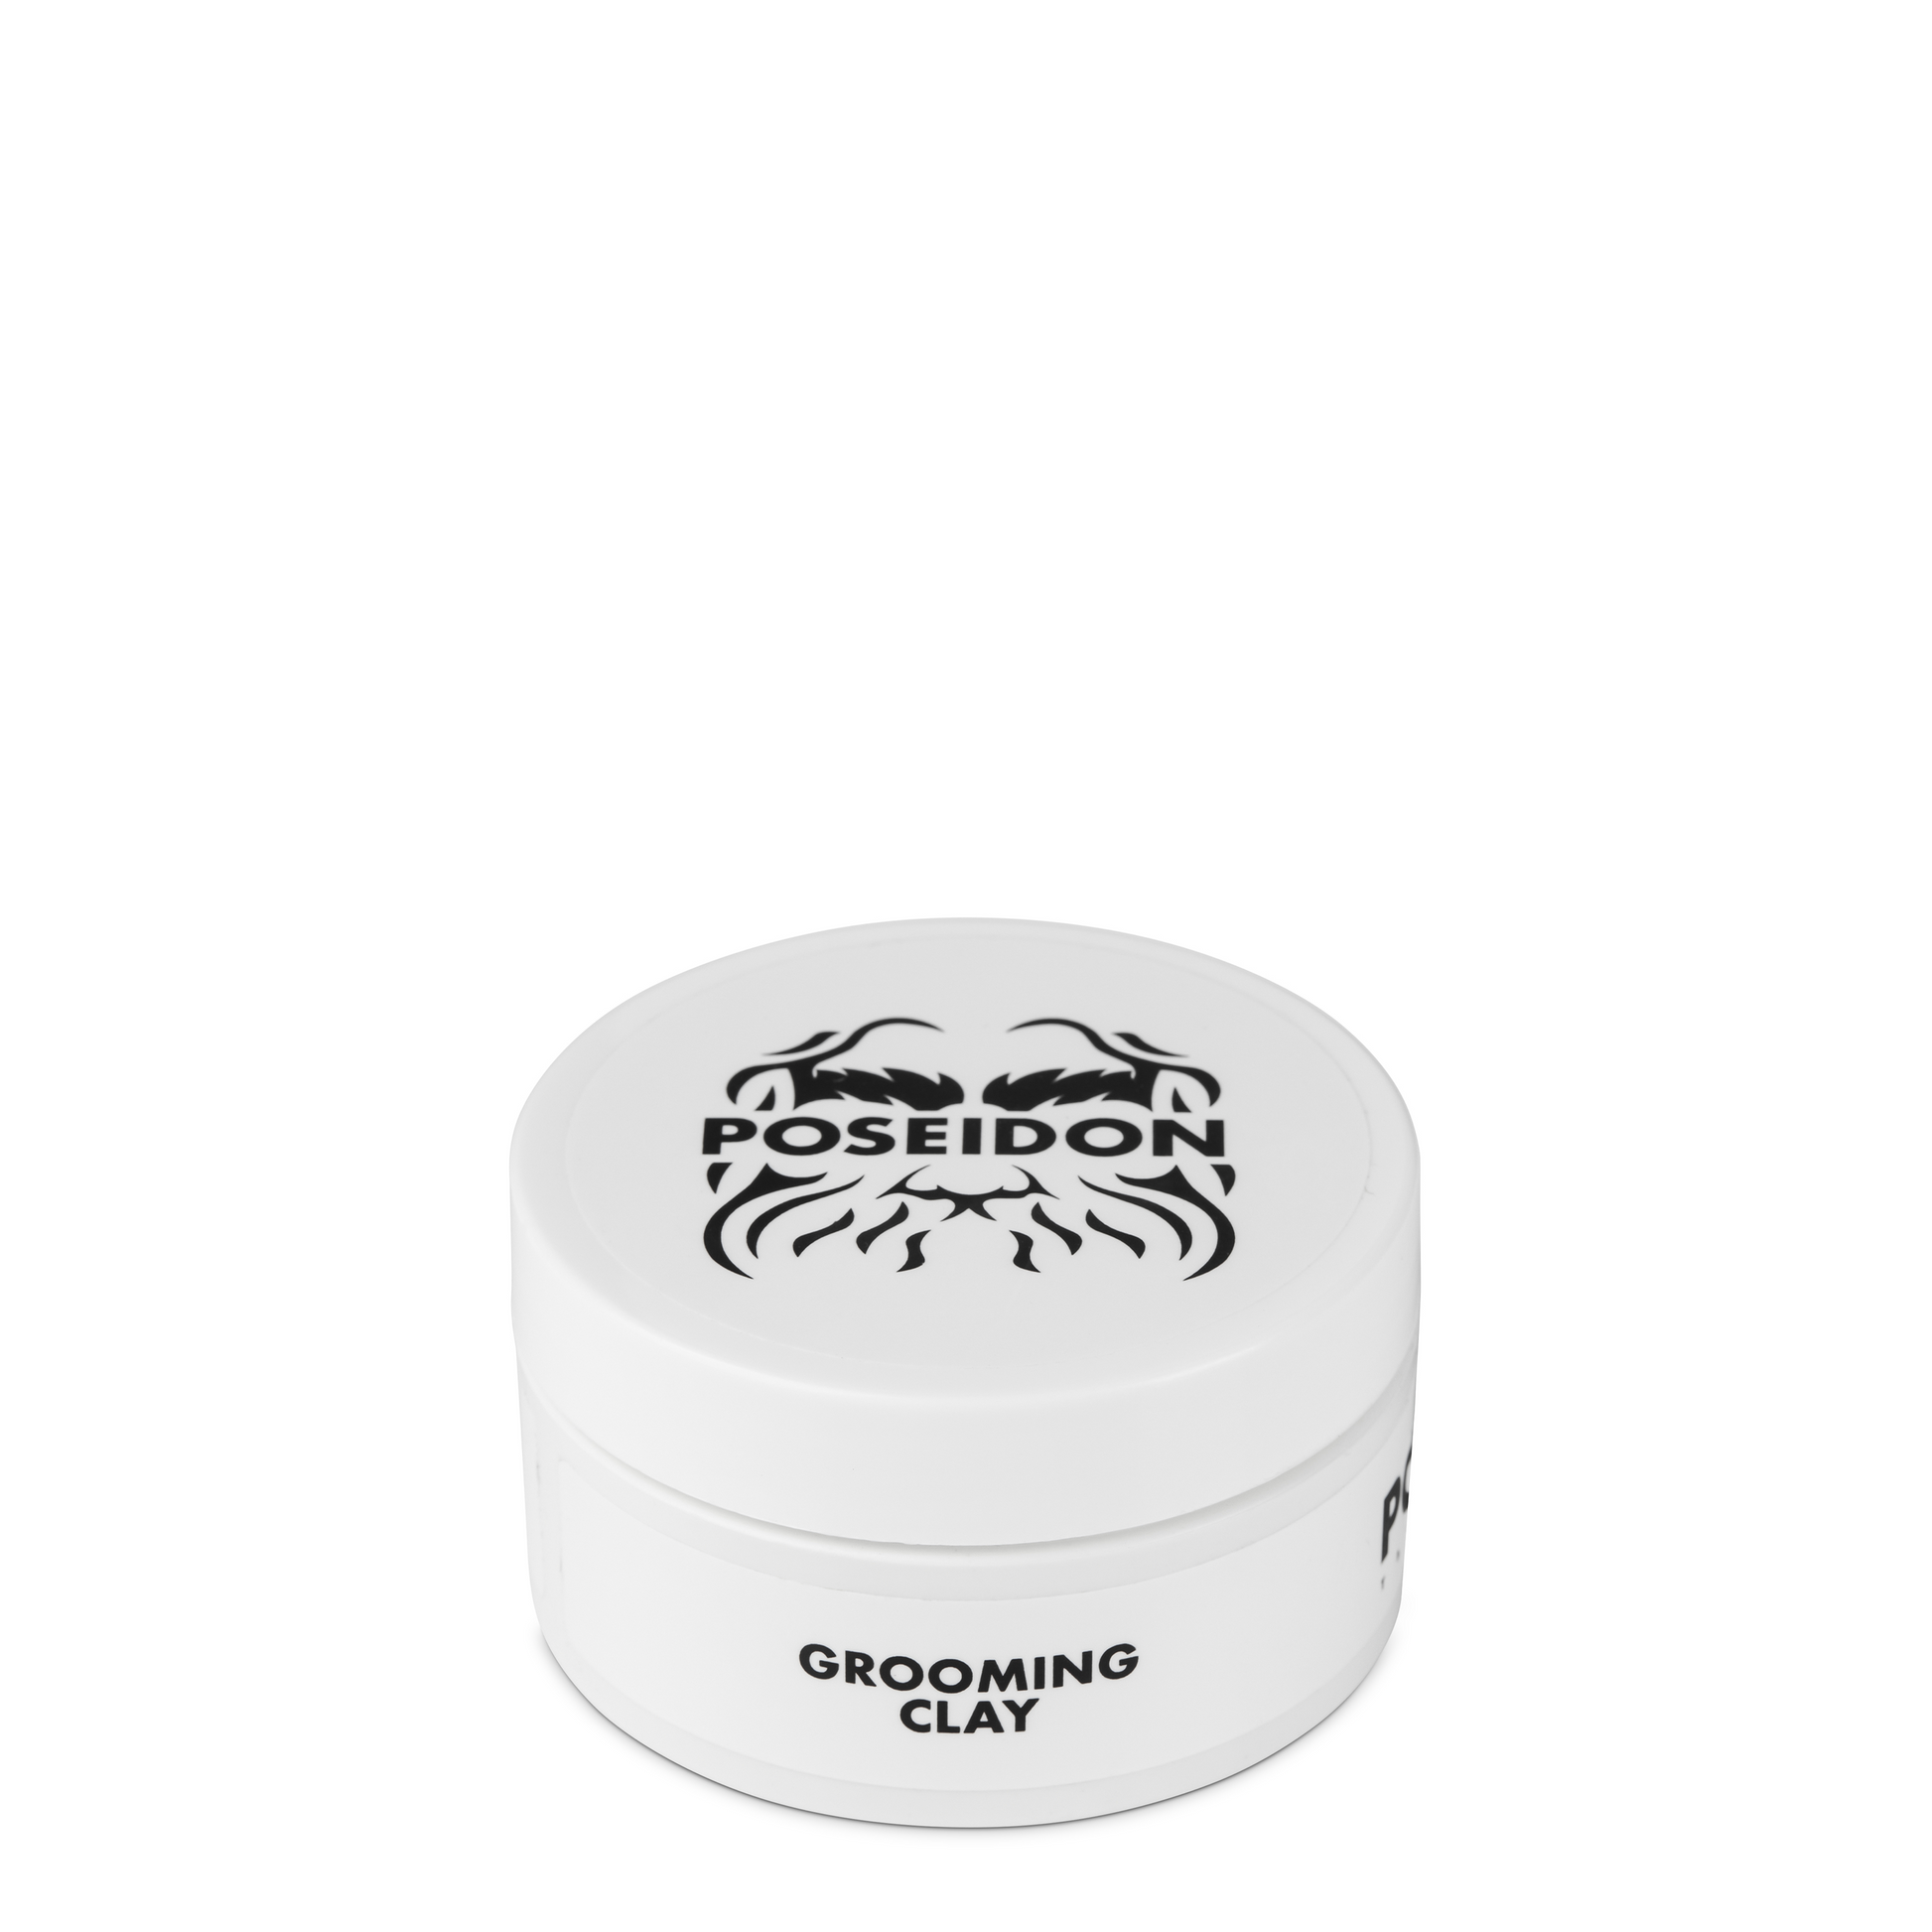 Poseidon Grooming Clay - Matte finish mastery for refined, sculpted styles